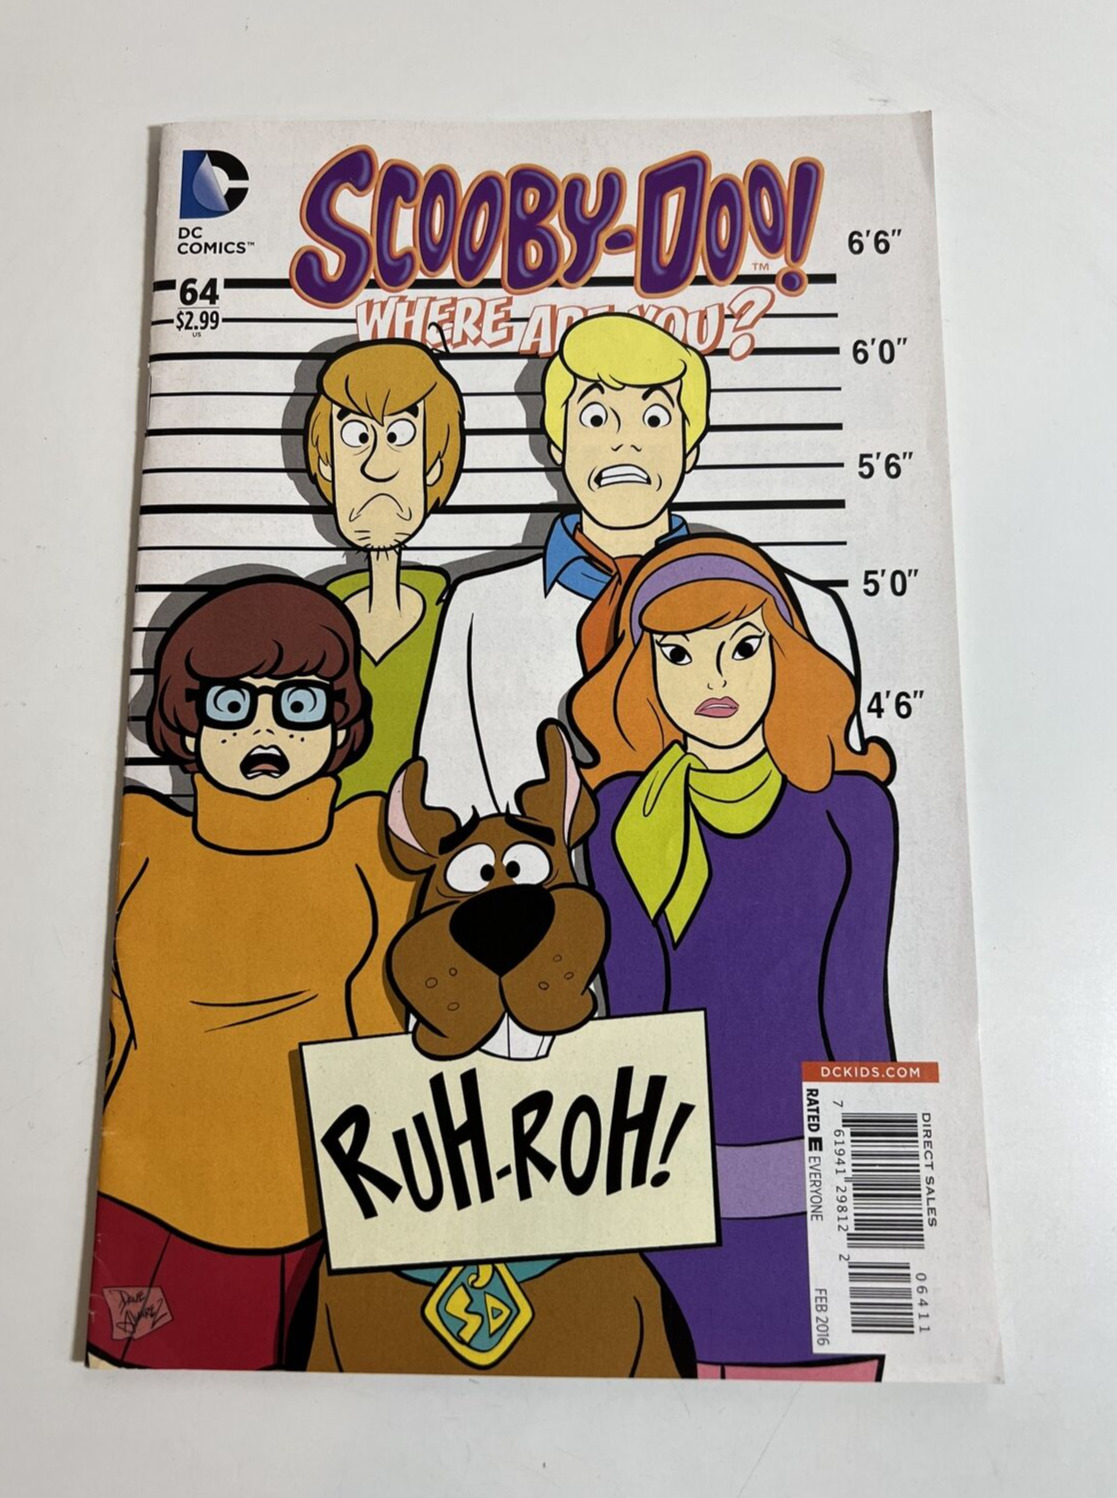 DC Comics Scooby-Doo: Where Are You? Issue #64 (2016) Mug shot Cover